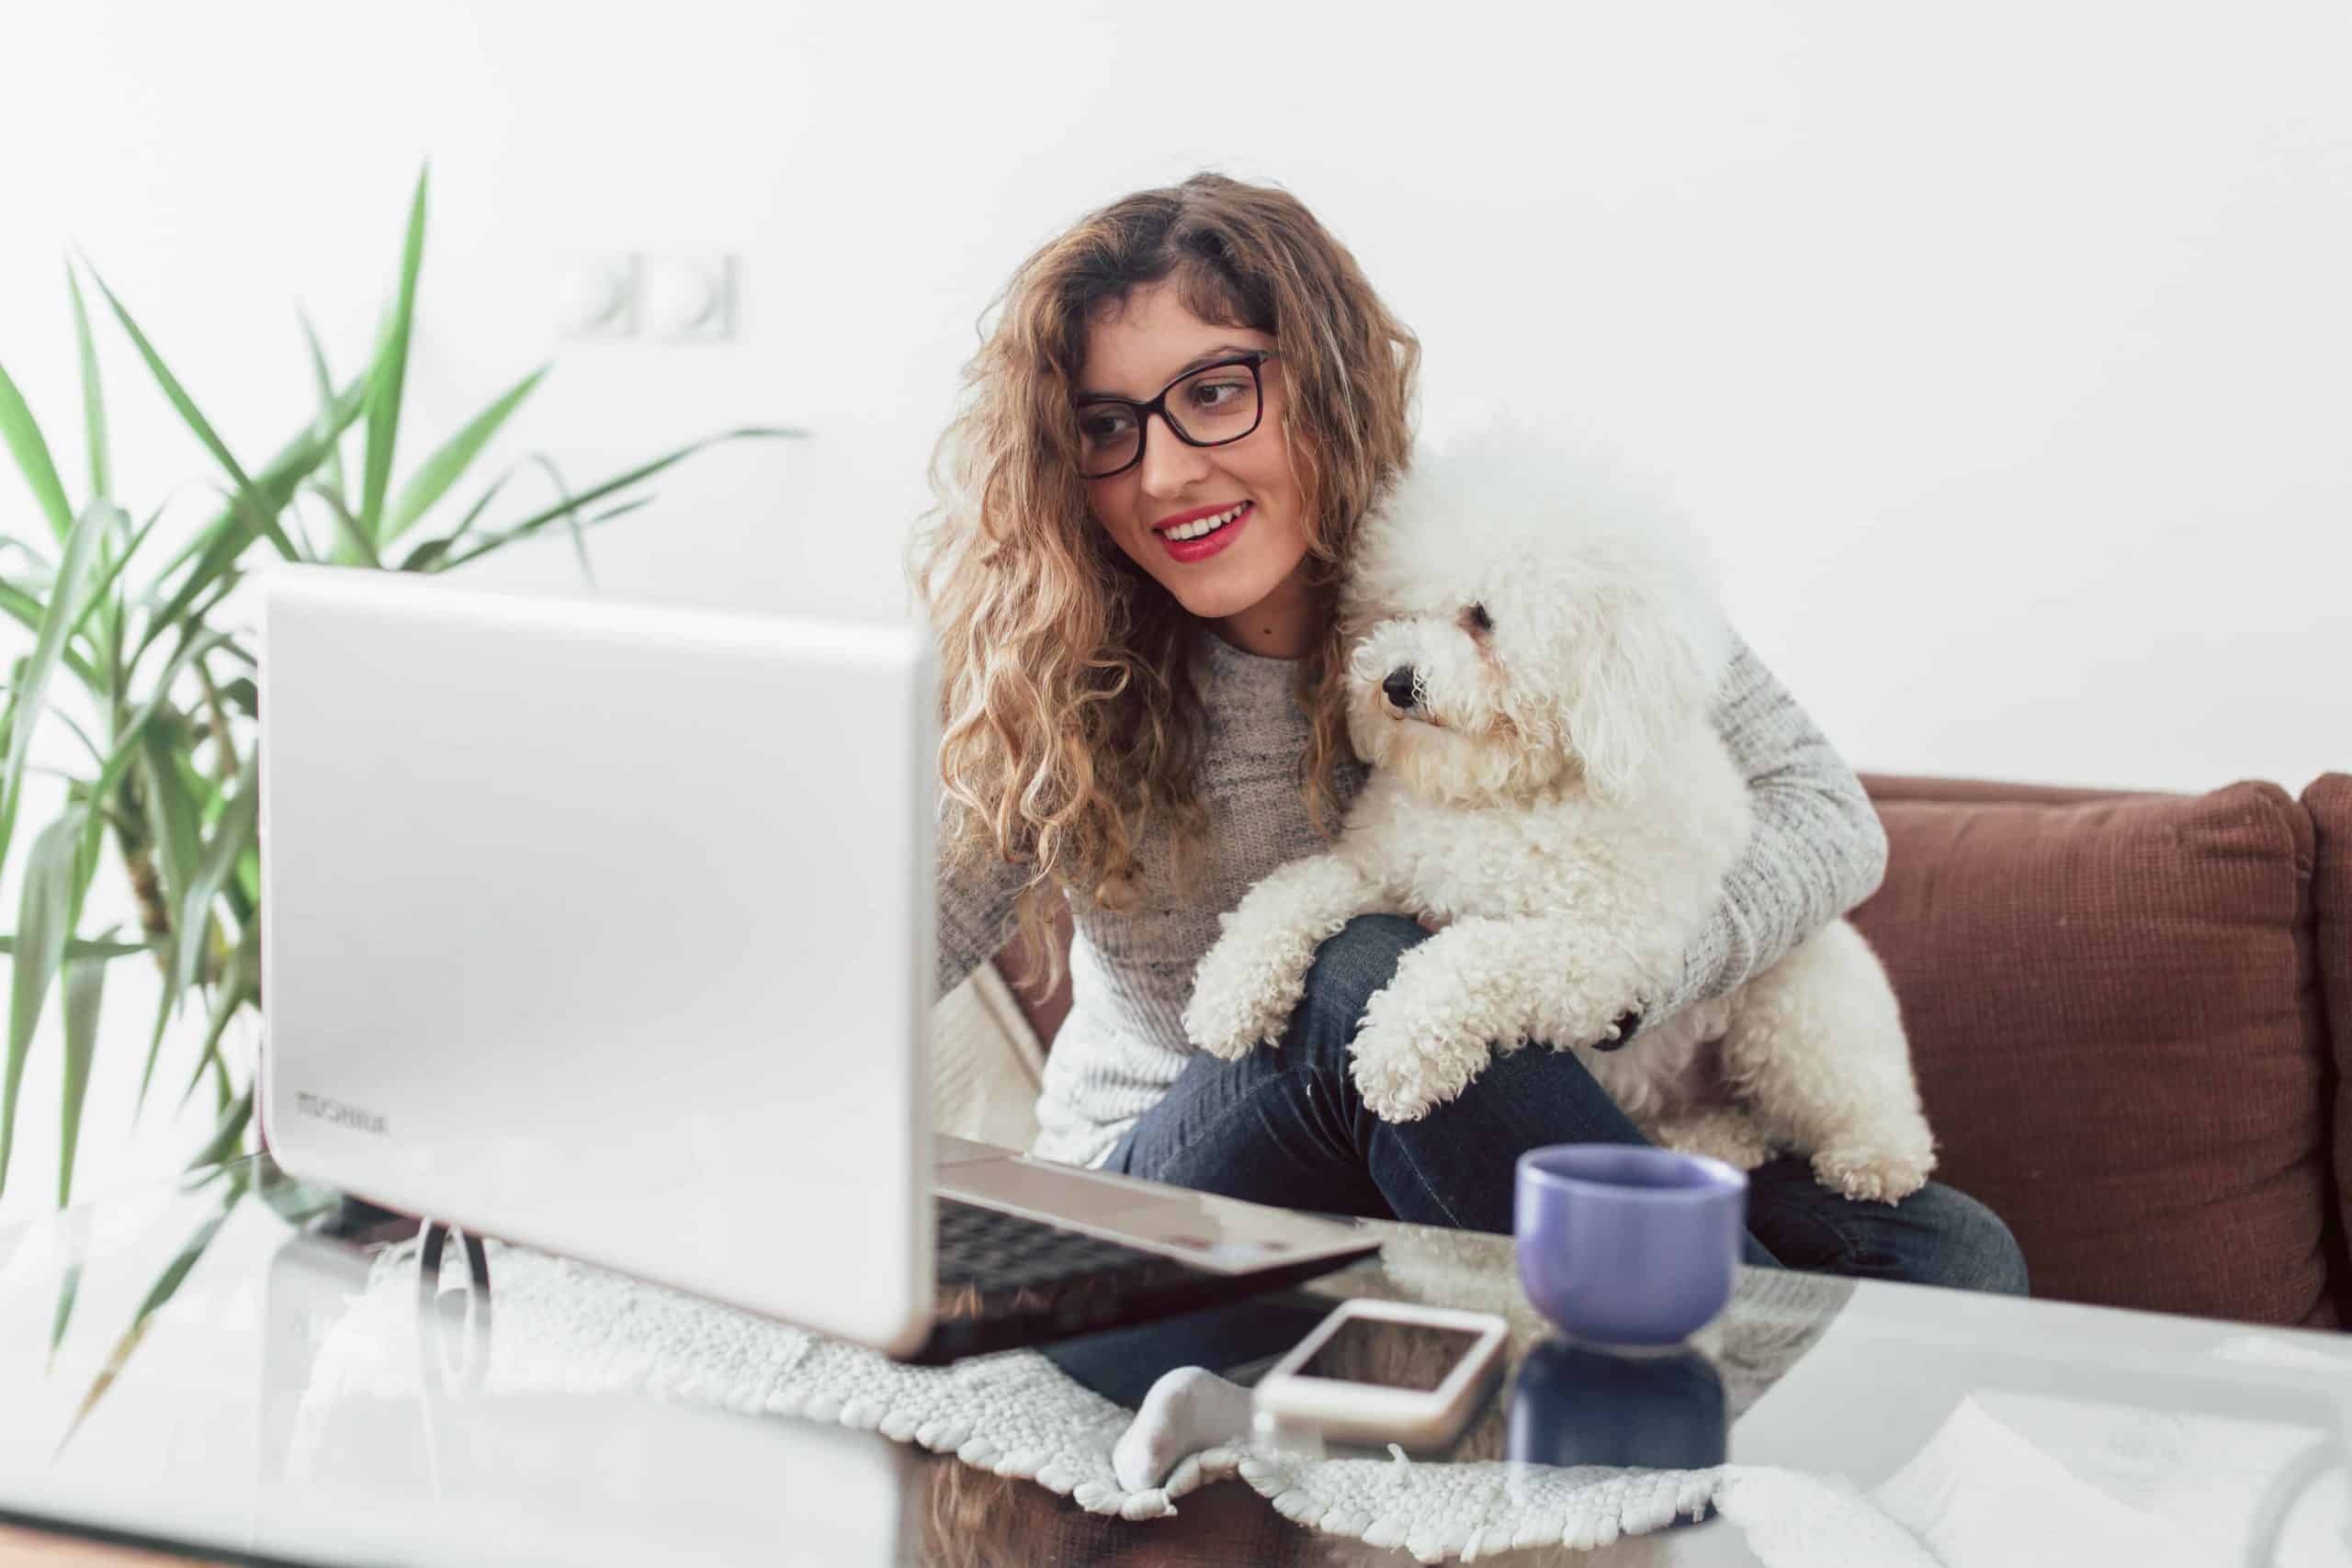 Woman studies while holding her poodle. Dogs help students get better grades in college. Dogs teach responsibility, attention to detail, and help improve self-confidence.